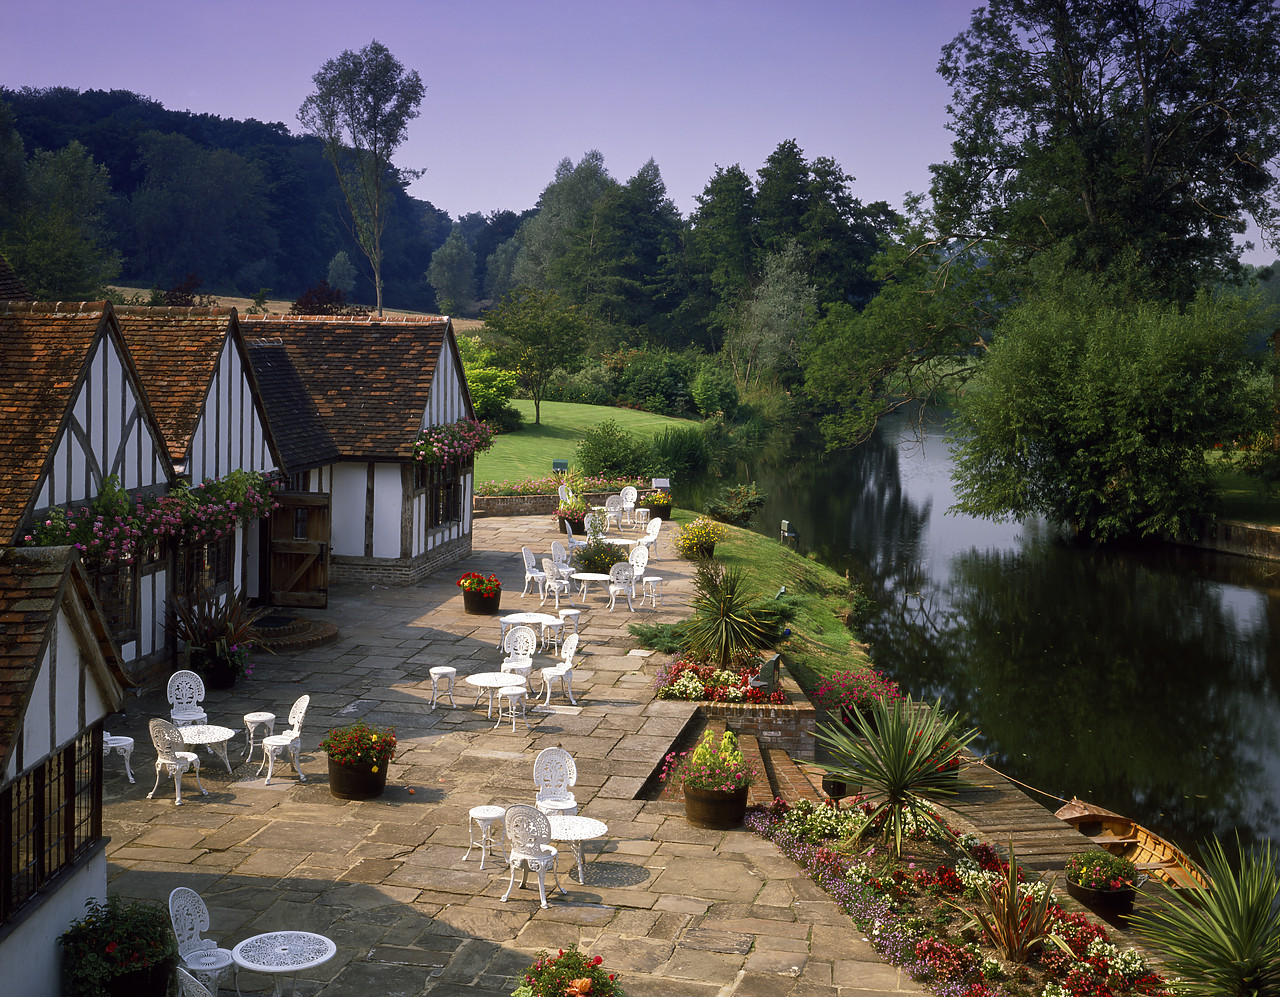 #903093 - Le Talbooth Hotel on River Stour, Dedham, Essex, England